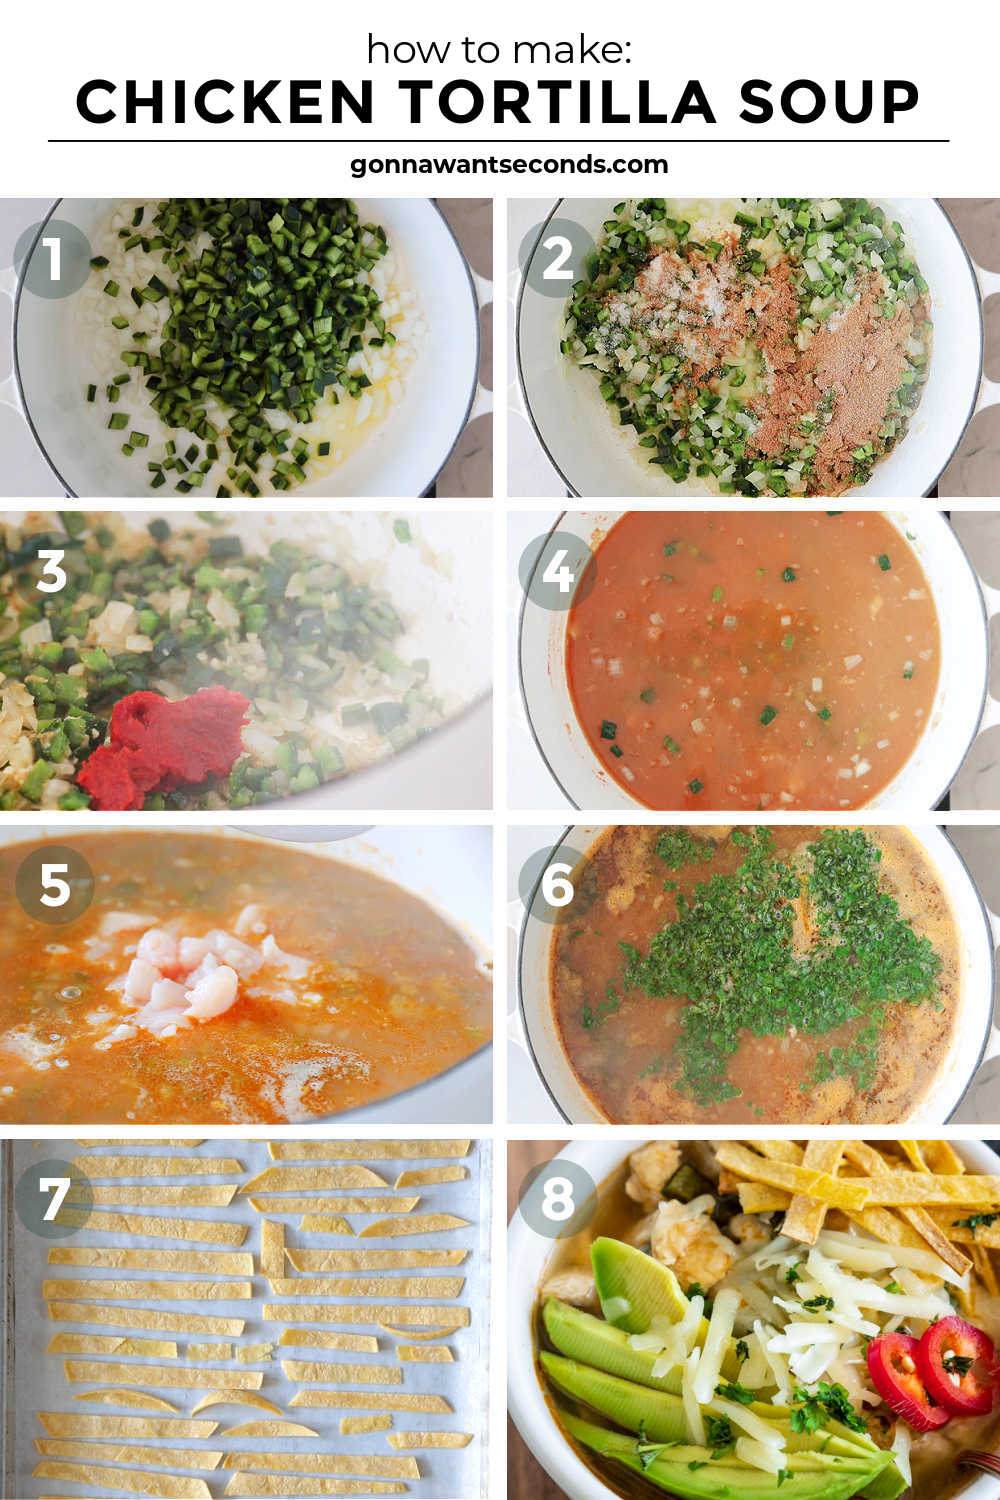 step by step how to make chicken tortilla soup